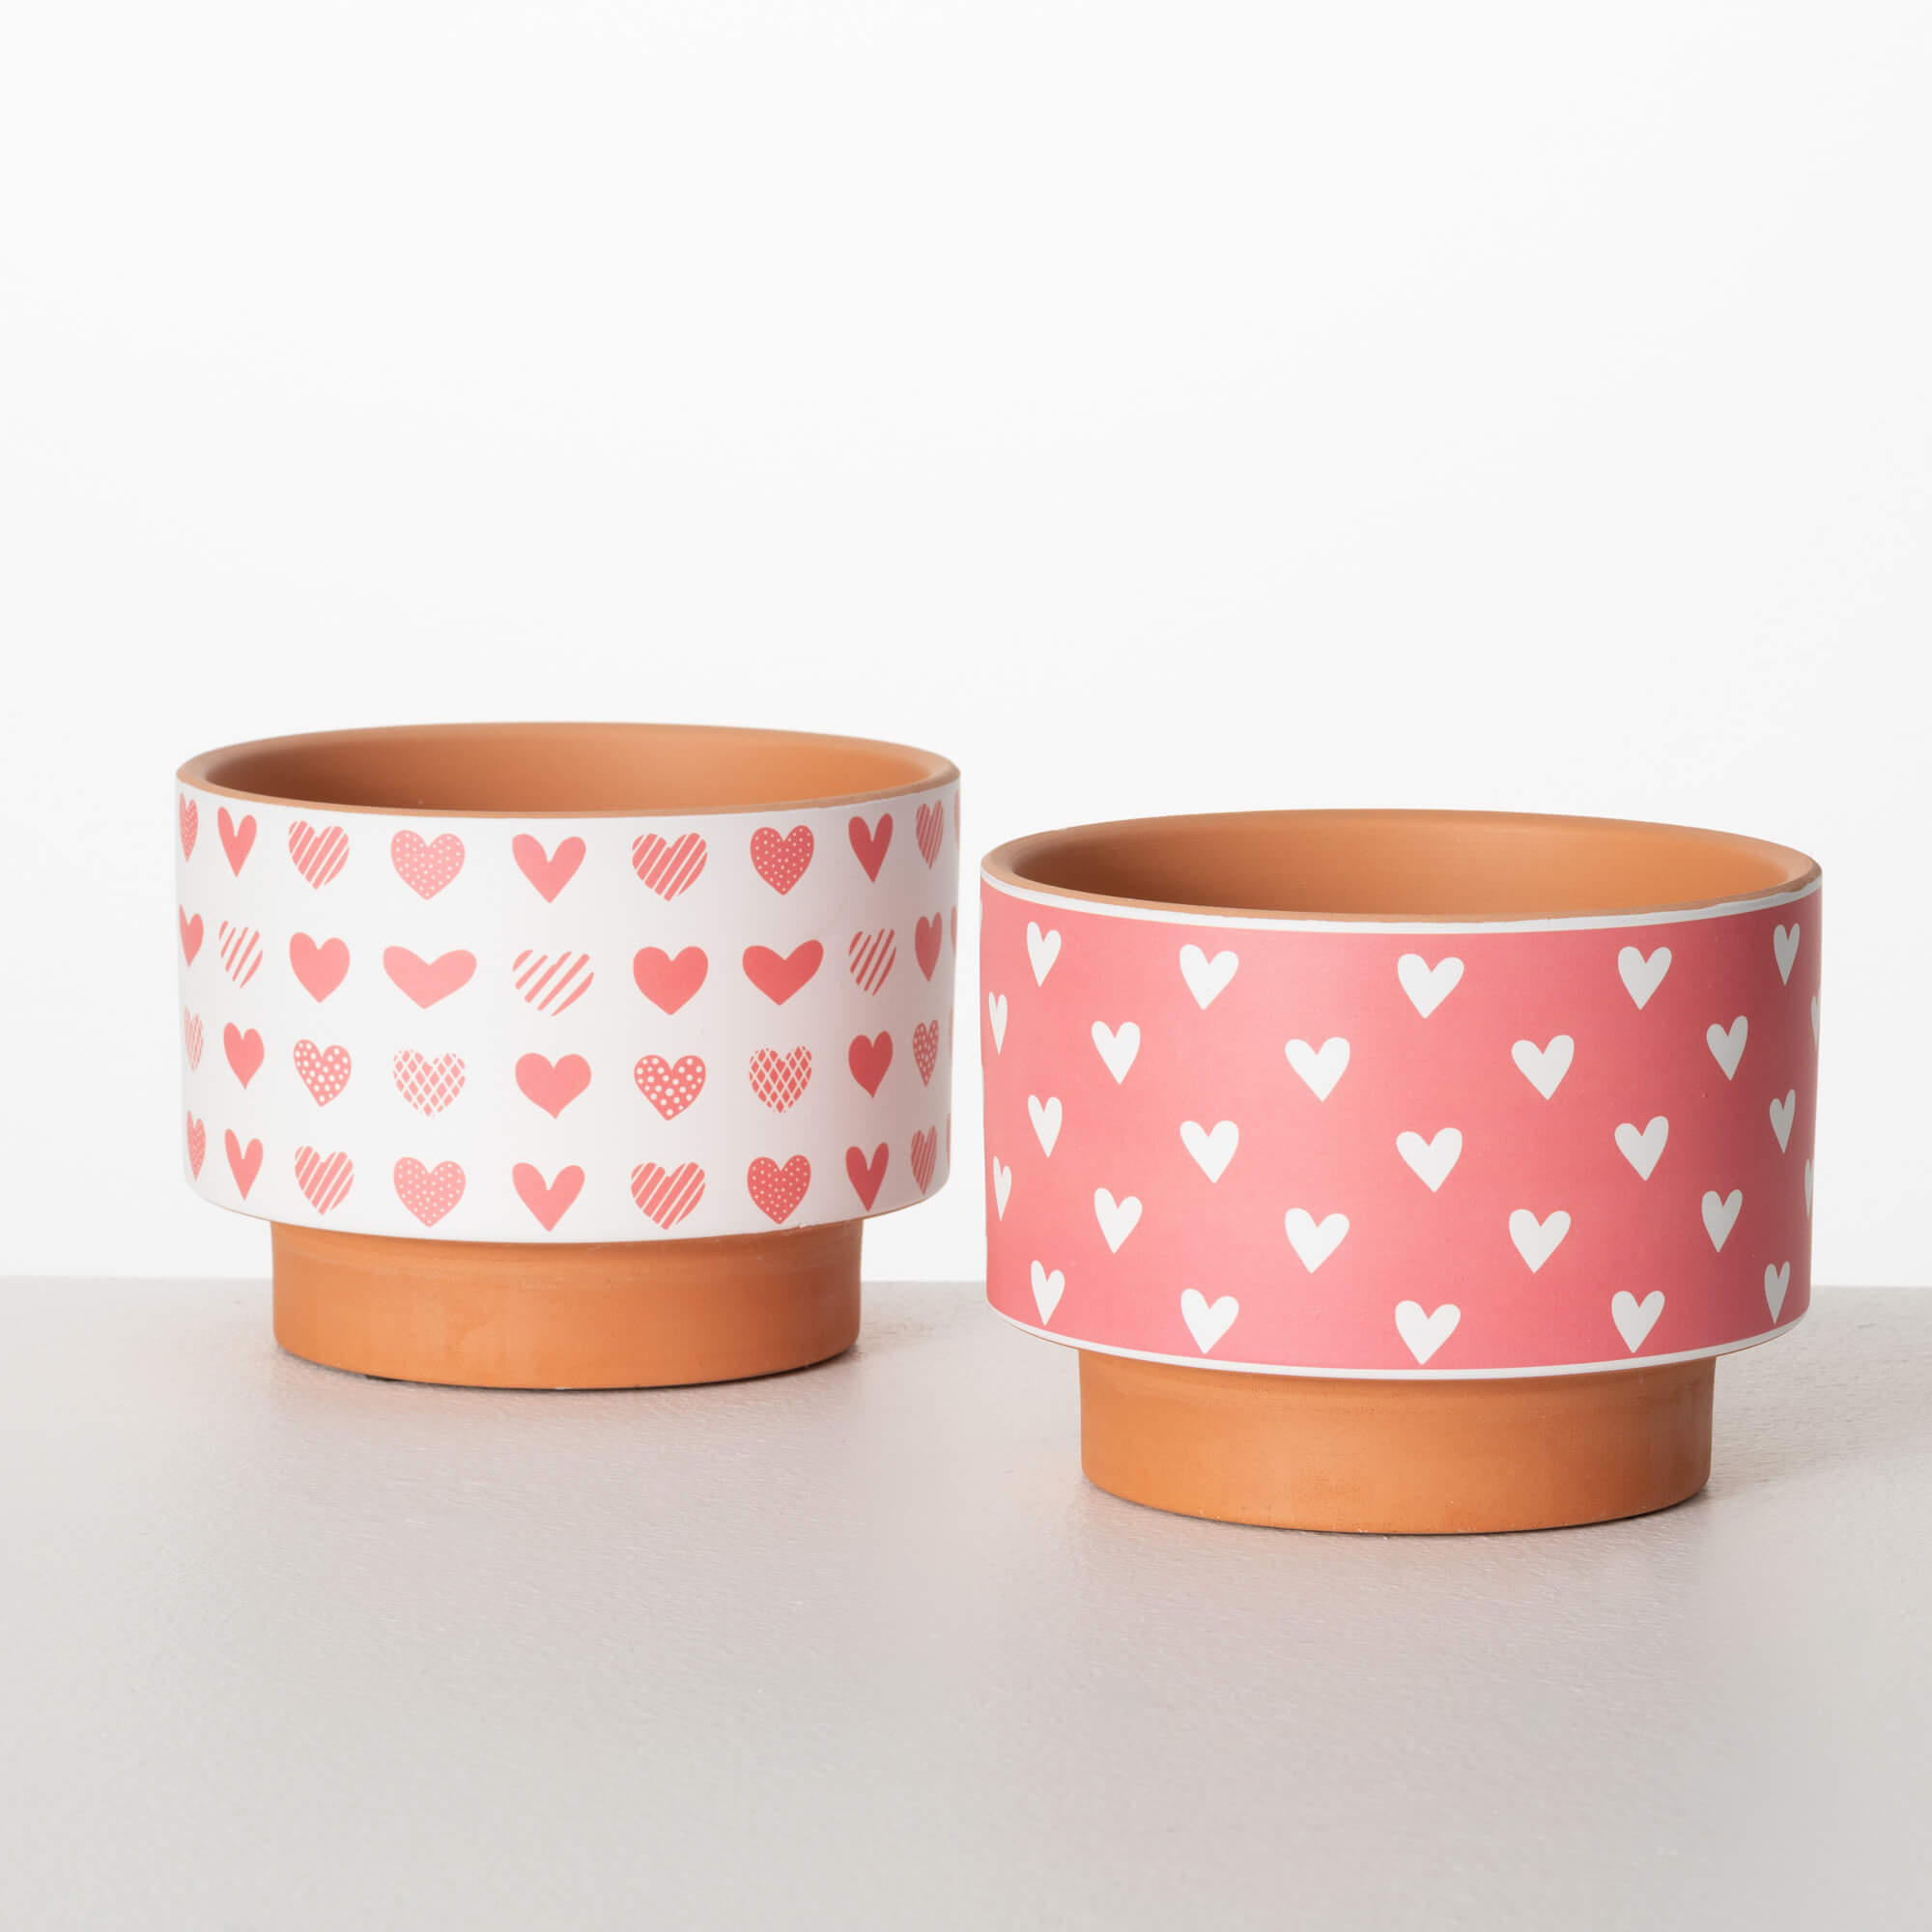 HEART CONTAINER Set 2